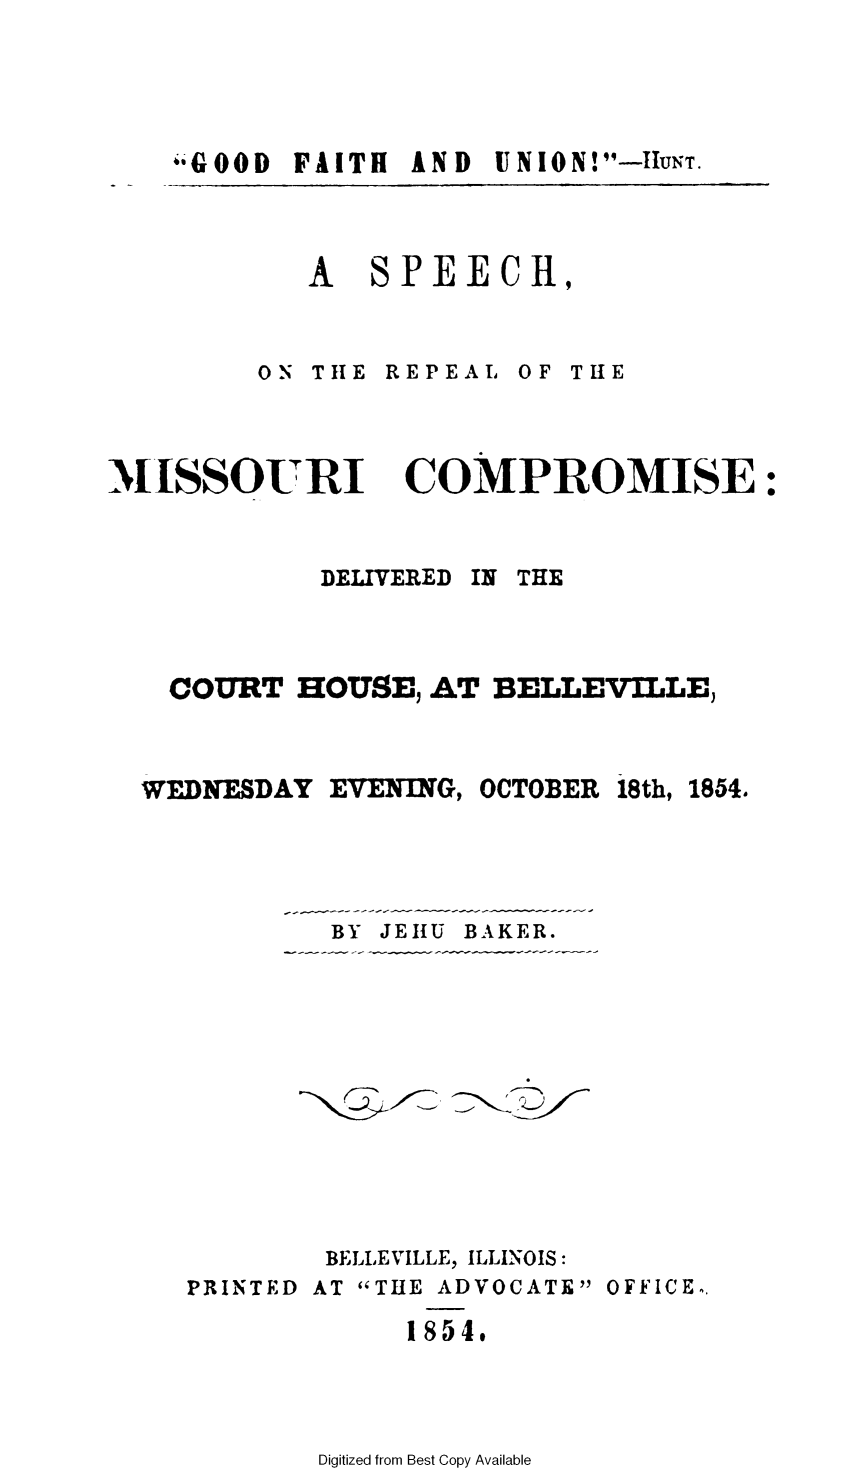 handle is hein.slavery/srmic0001 and id is 1 raw text is: 



*GOOD FAITH  AND


A   SPEECH,


ON THE REPEAL


MISSOURI


OF THE


COMPROMISE:


DELIVERED


COURT  HOUSE,  AT BELLEVILLE,


WEDNESDAY  EVENING,


OCTOBER


18th, 1854.


BY JEHU BAKER.


        BELLEVILLE, ILLINOIS:
PRINTED AT THE ADVOCATE OFFICE.
             1854.


Digitized from Best Copy Available


IN THE


UNION! -11UNT.


